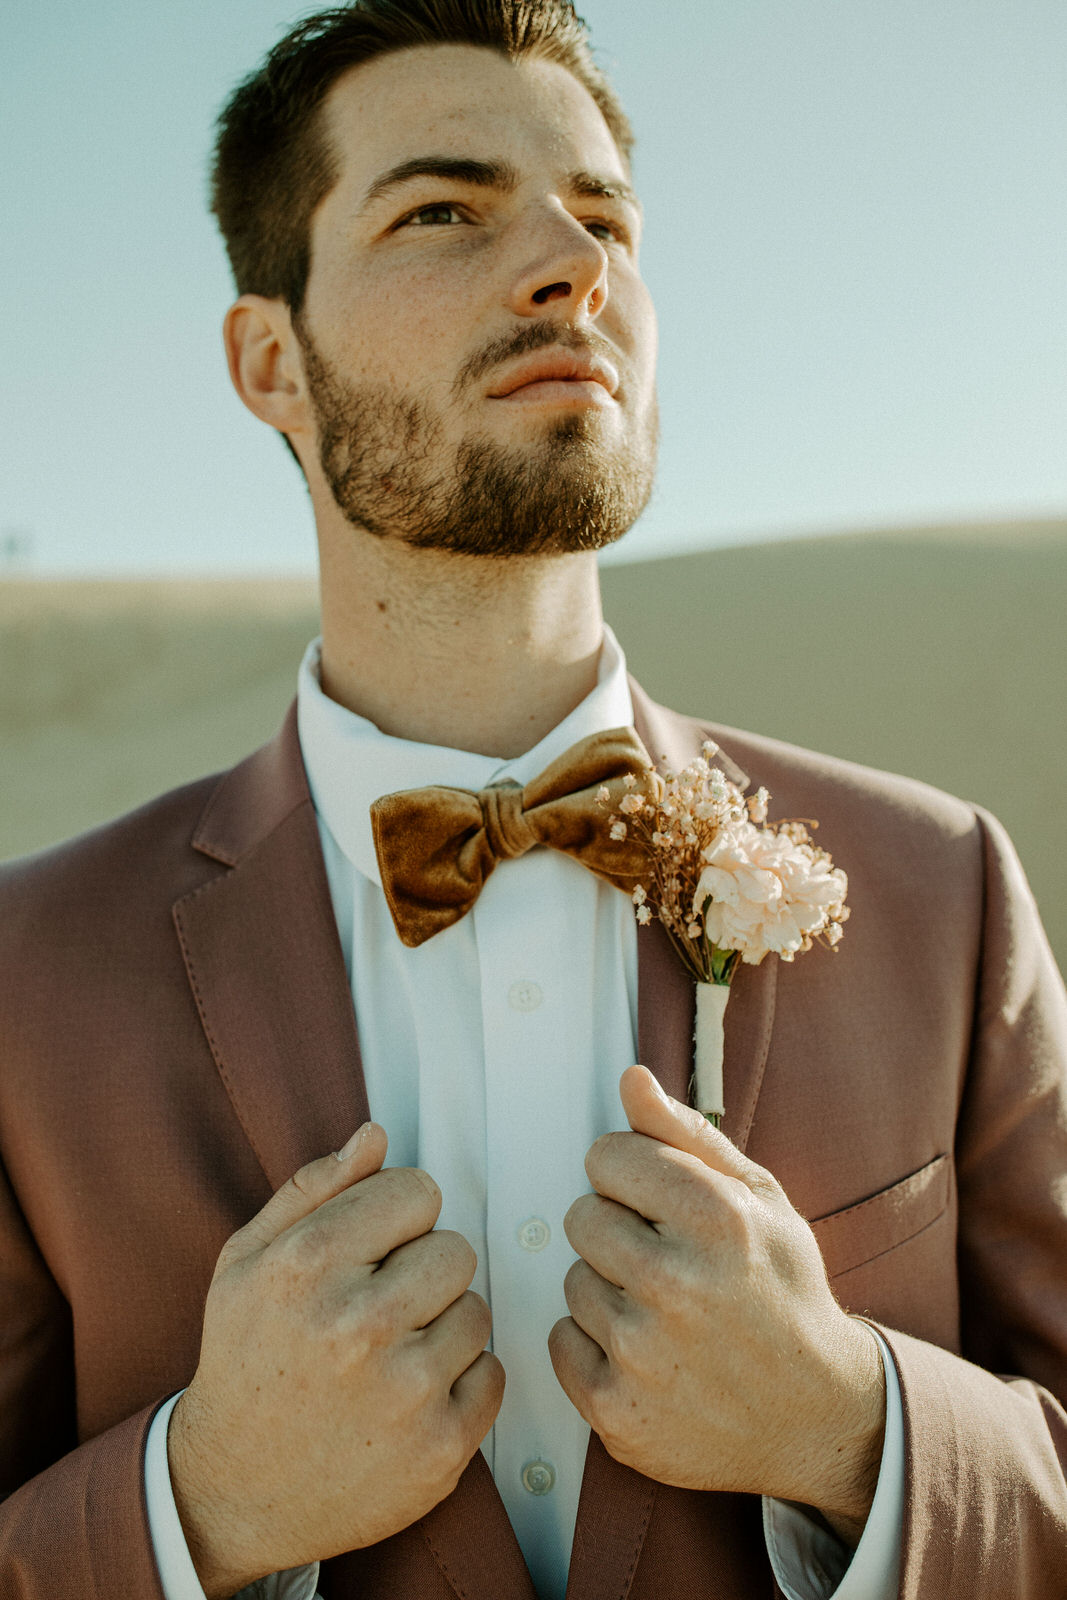 Glamis Styled Elopement by Velazquez Photography › Beloved Stories